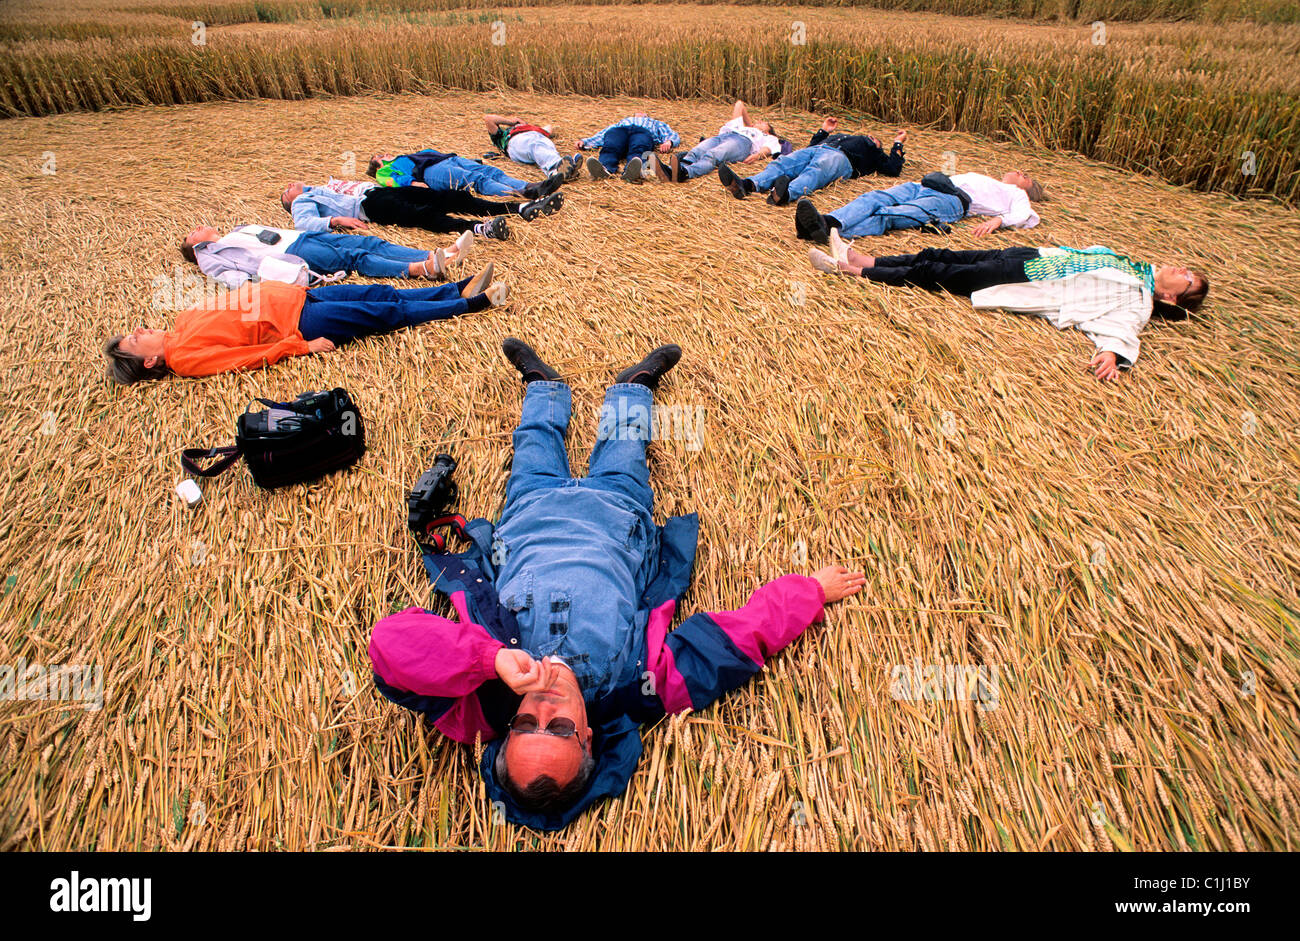 United Kingdom, Wiltshire, Crop-circles, Michael Hessemann leading a group of meditation inside a formation Stock Photo